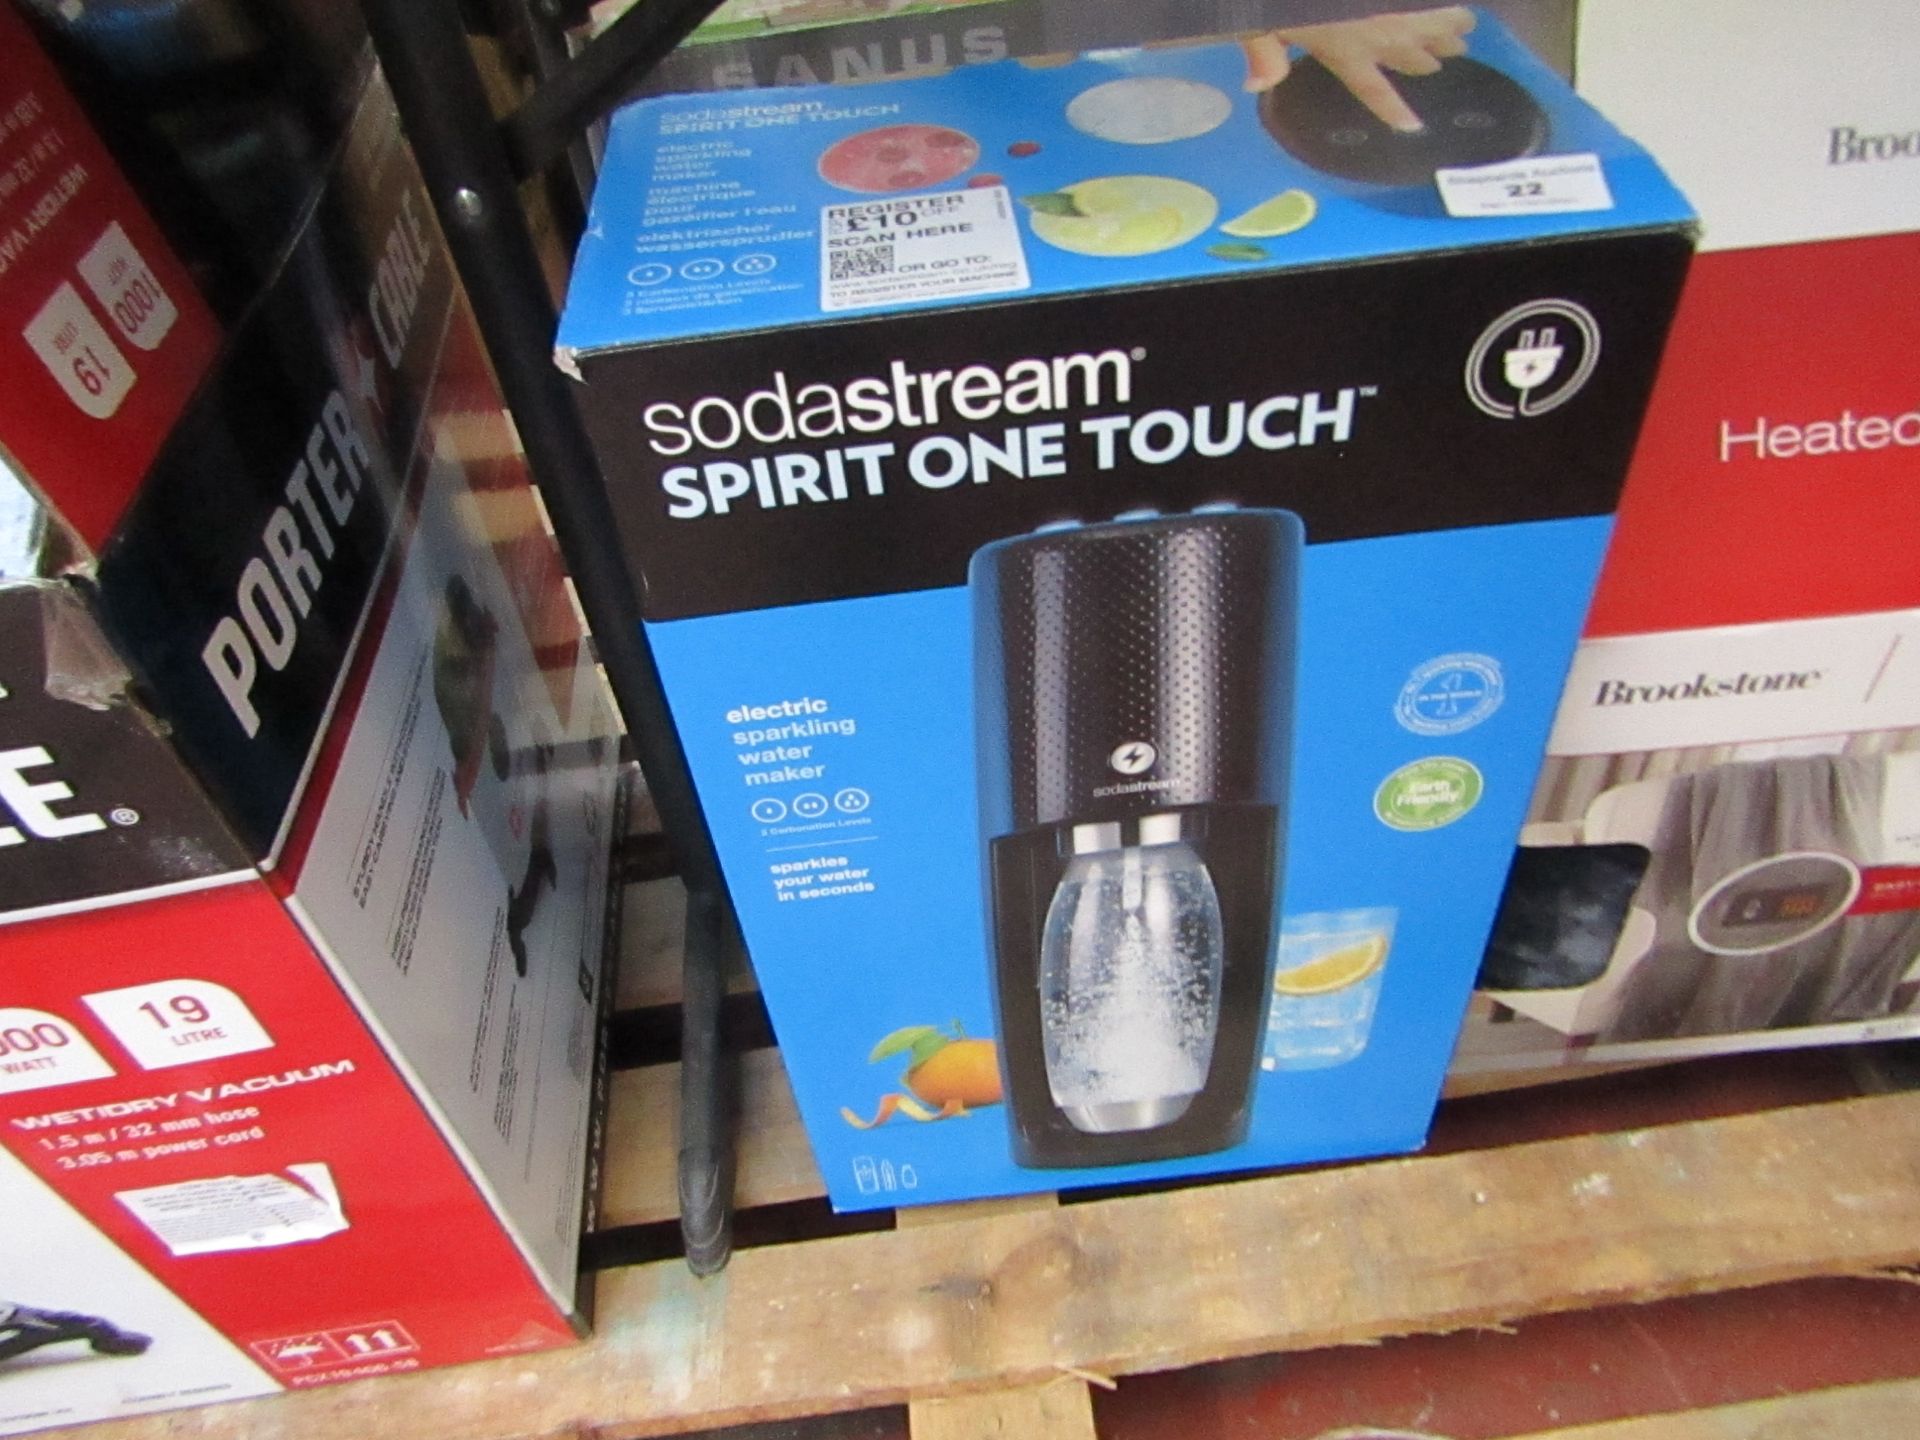 Soda Stream spirit one touch electrc sparkling water maker, unchecked and boxed.